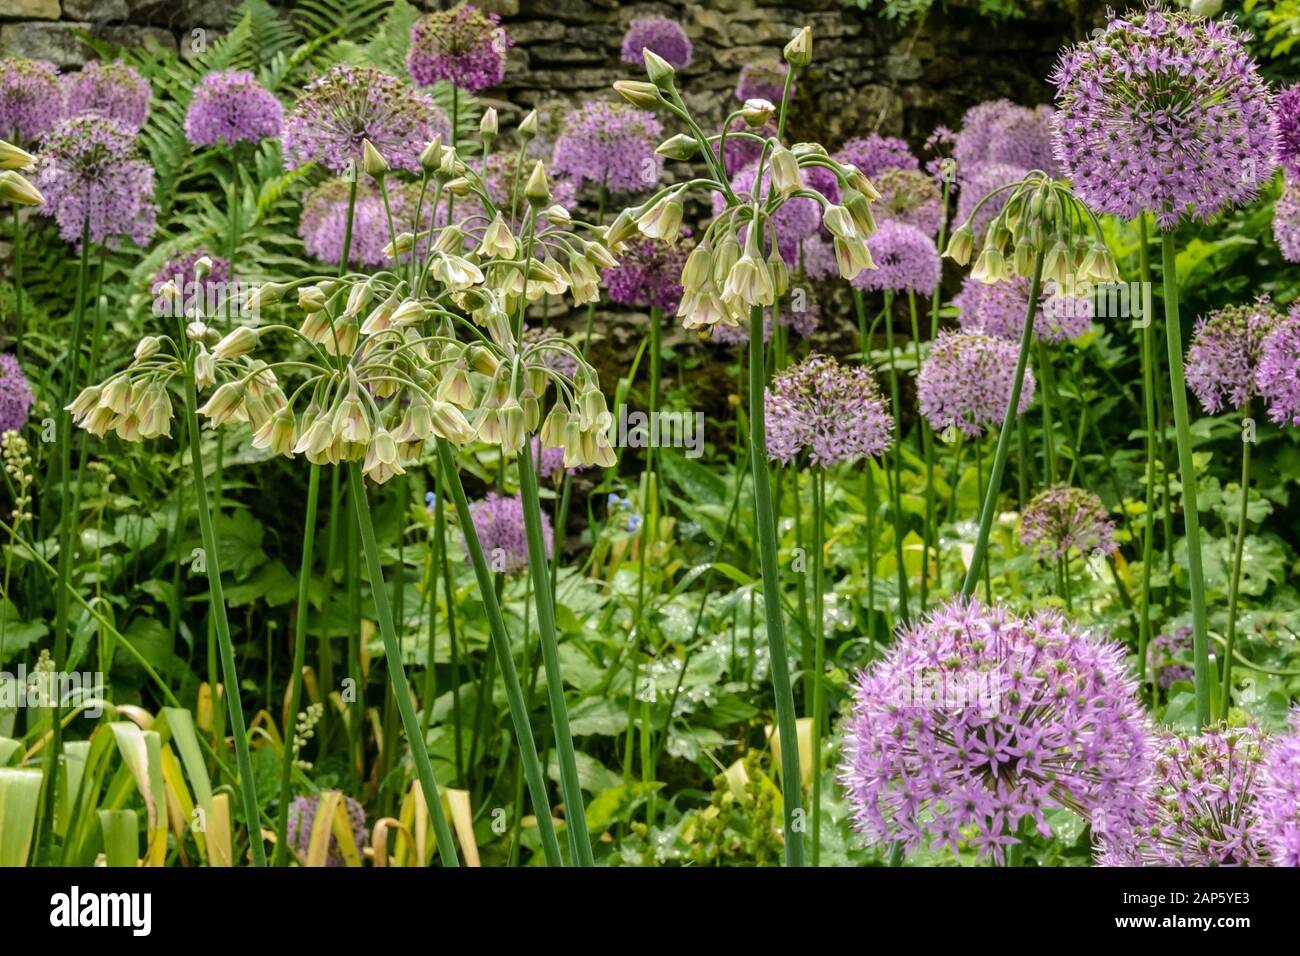 Dangling bell-shaped flowers of Nectaroscordum siculum combined with purple alliums make a spectacular late Spring display Stock Photo